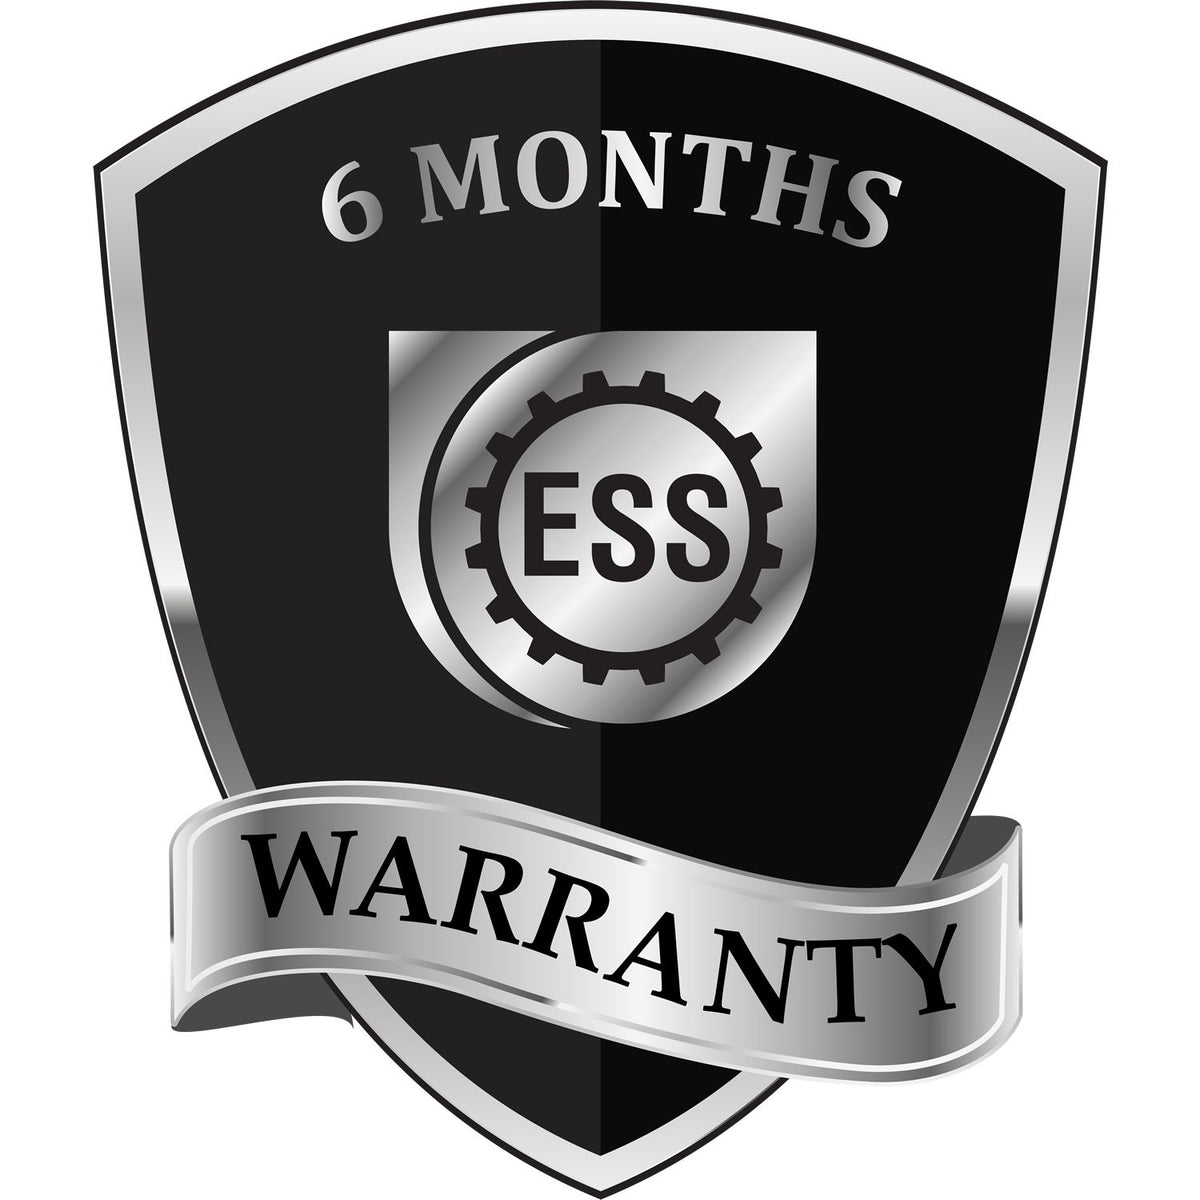 A black and silver badge or emblem showing warranty information for the Colorado Professional Geologist Seal Stamp